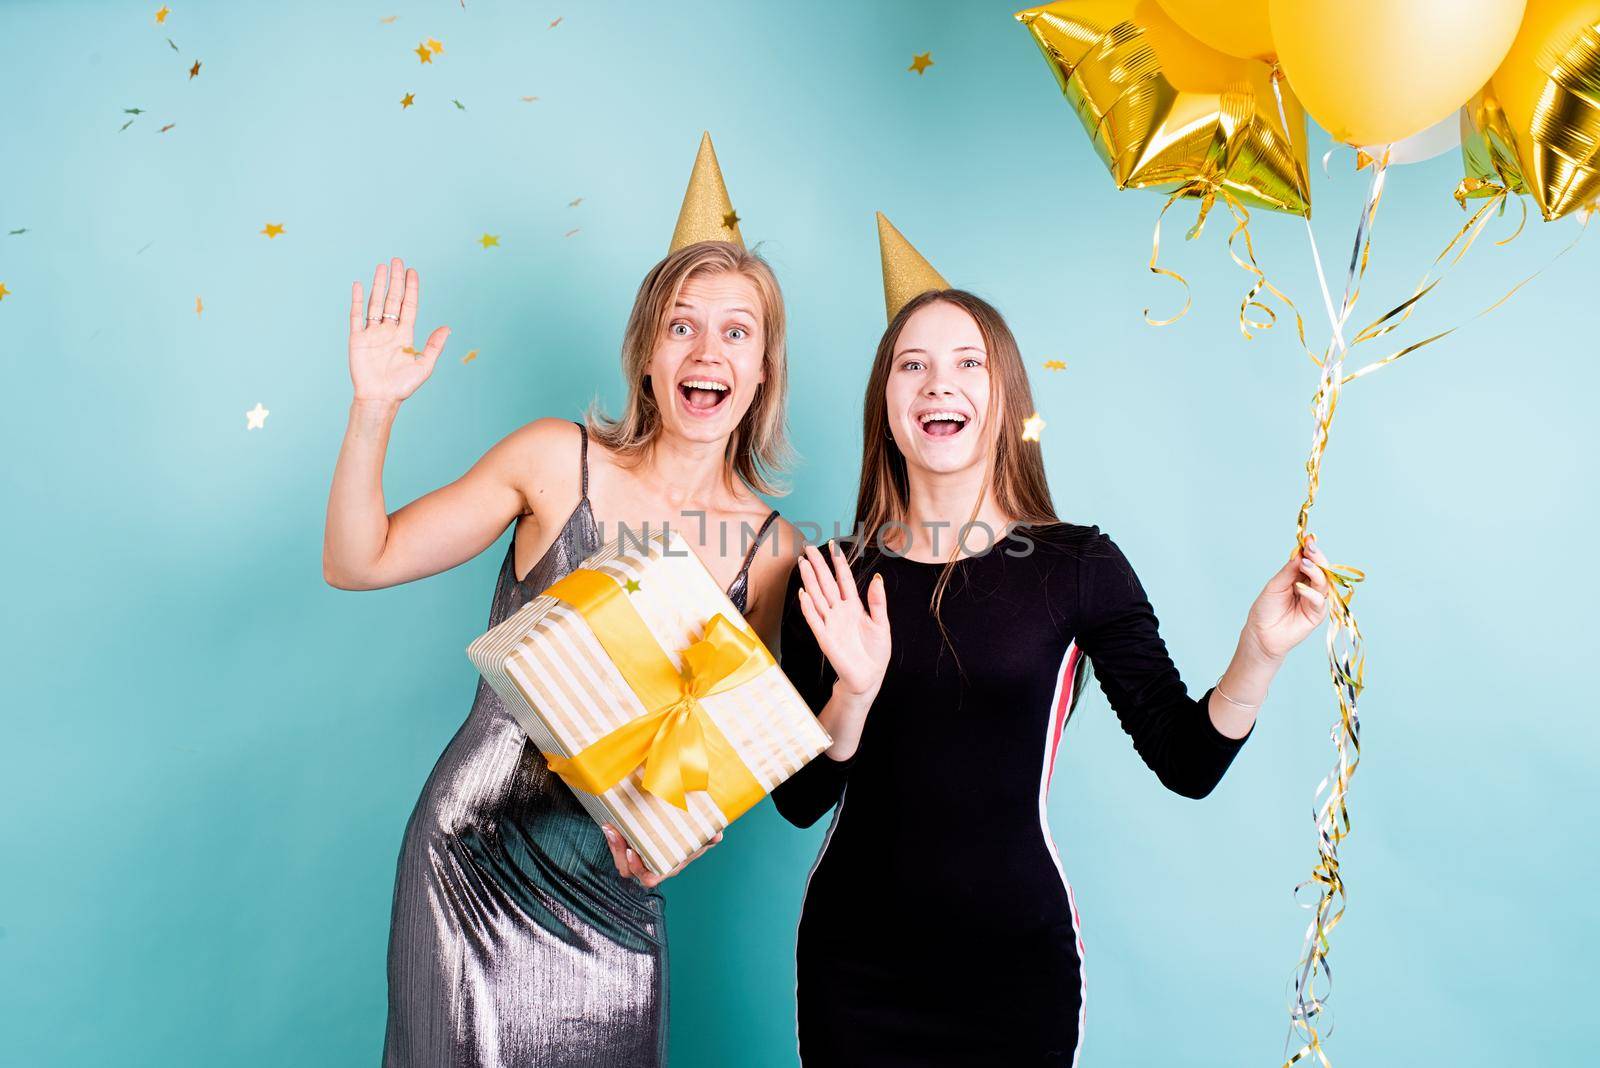 Two young women in birthday hats holding balloons celebrating birthday over blue background by Desperada